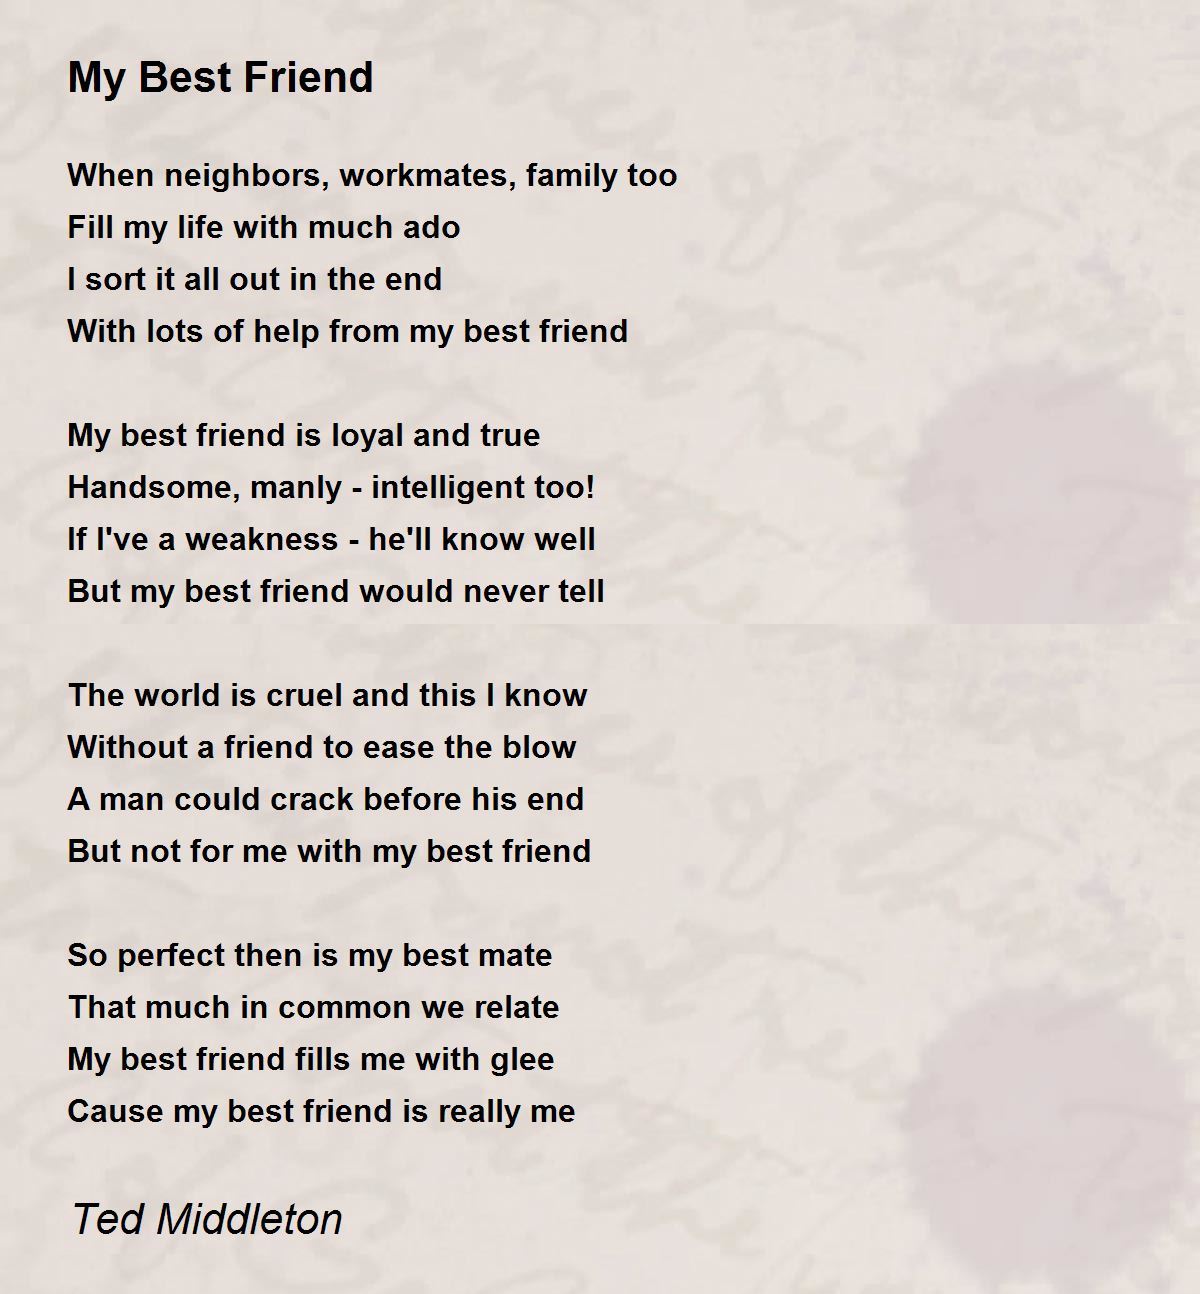 My Best Friend - My Best Friend Poem By Ted Middleton